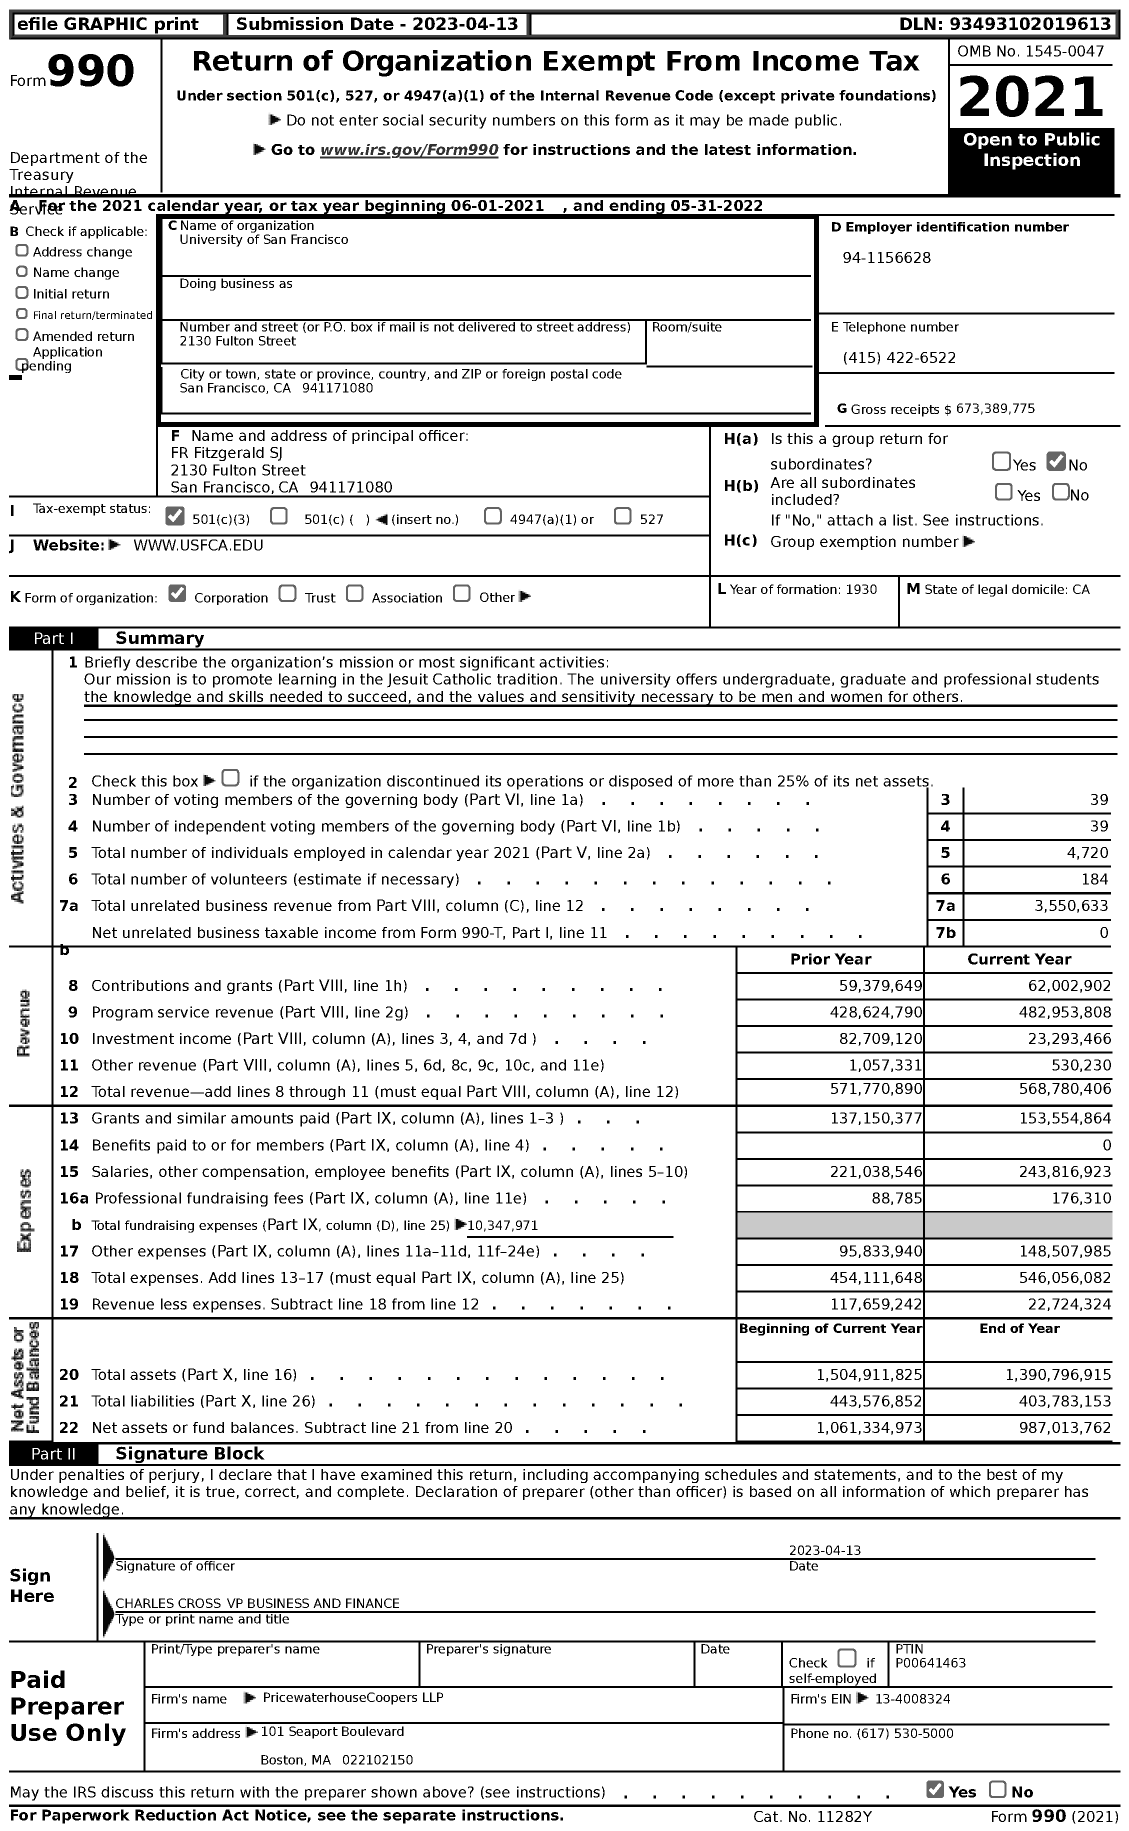 Image of first page of 2021 Form 990 for University of San Francisco (USF)